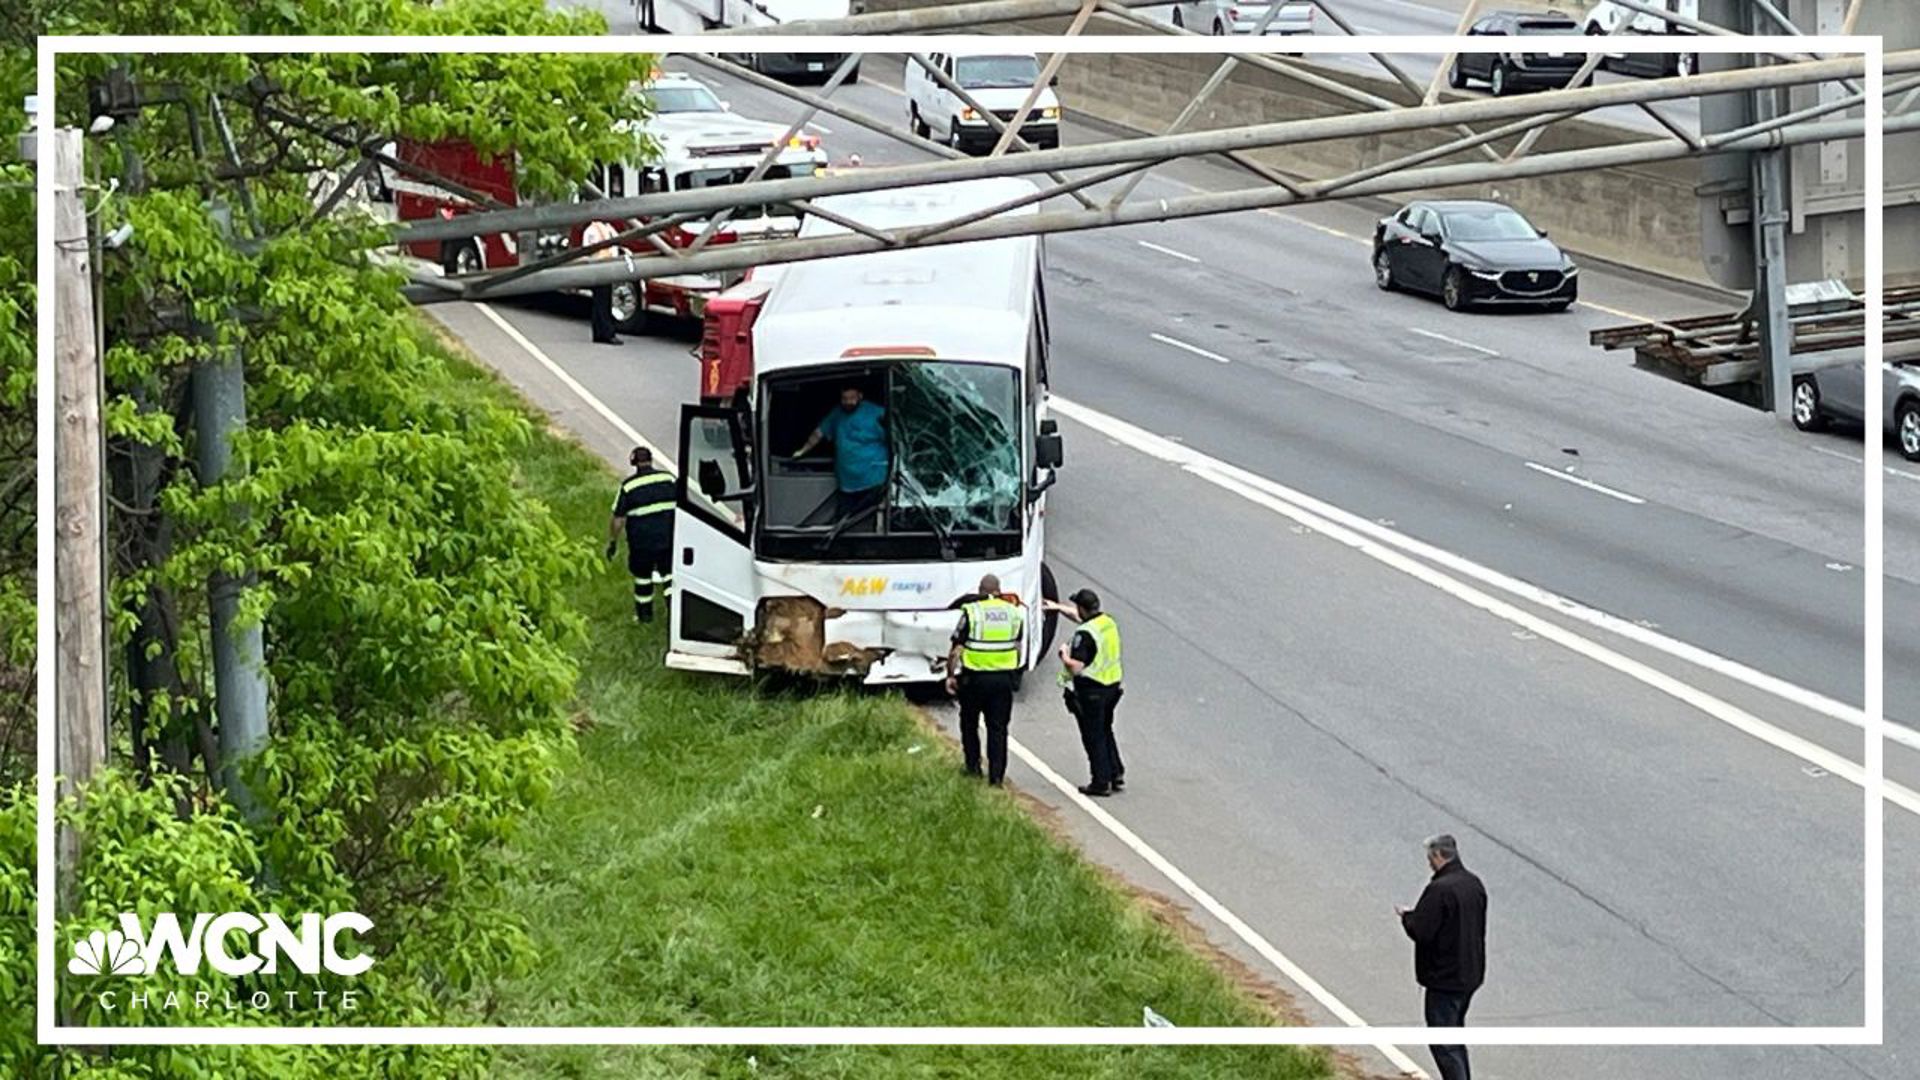 A crash involving two charter buses caused major delays on Interstate 85 in Gaston County on Friday.